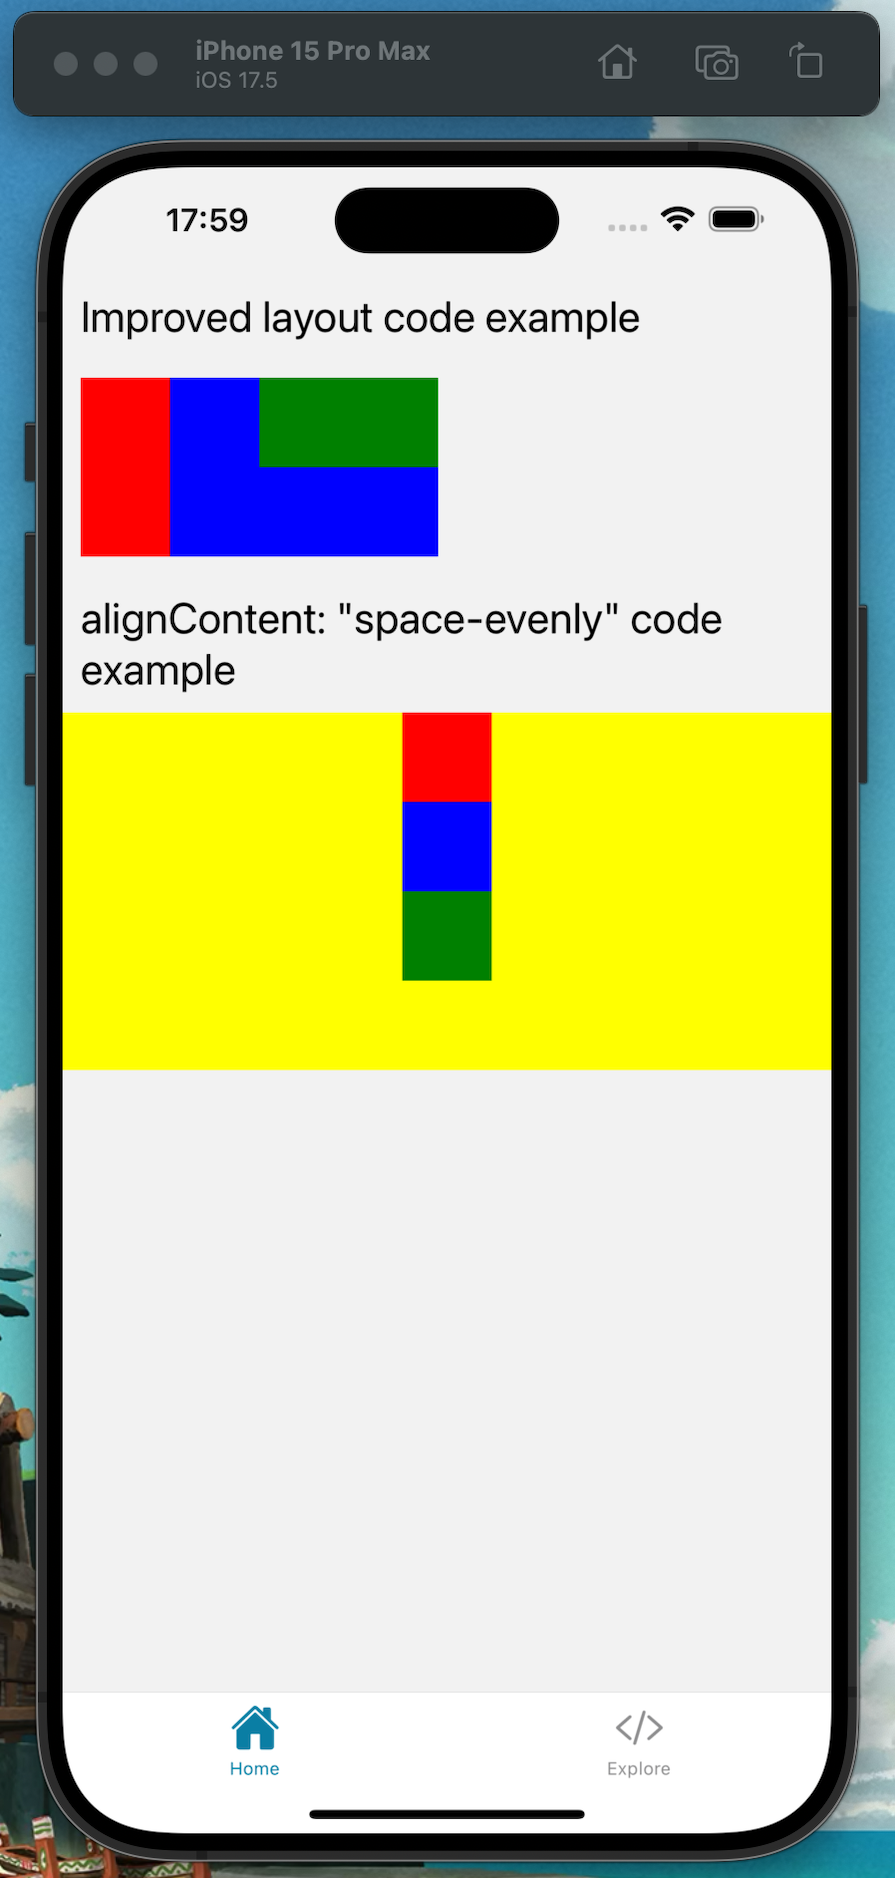 React Native Improved Layout Code With Evenly Spaced Red Green And Blue Boxes